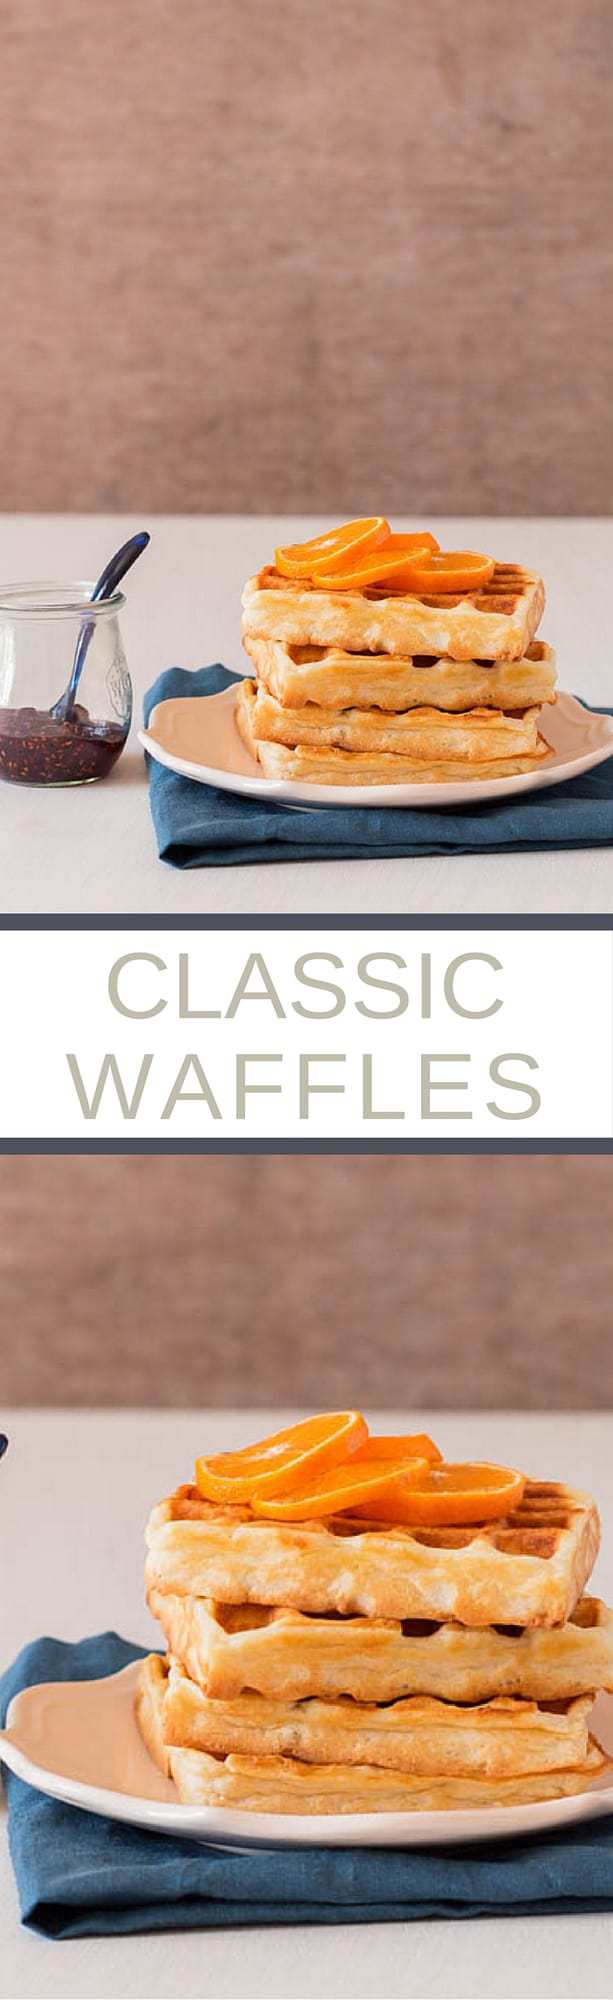 Classic Waffles Recipe | Recipes From A Pantry 